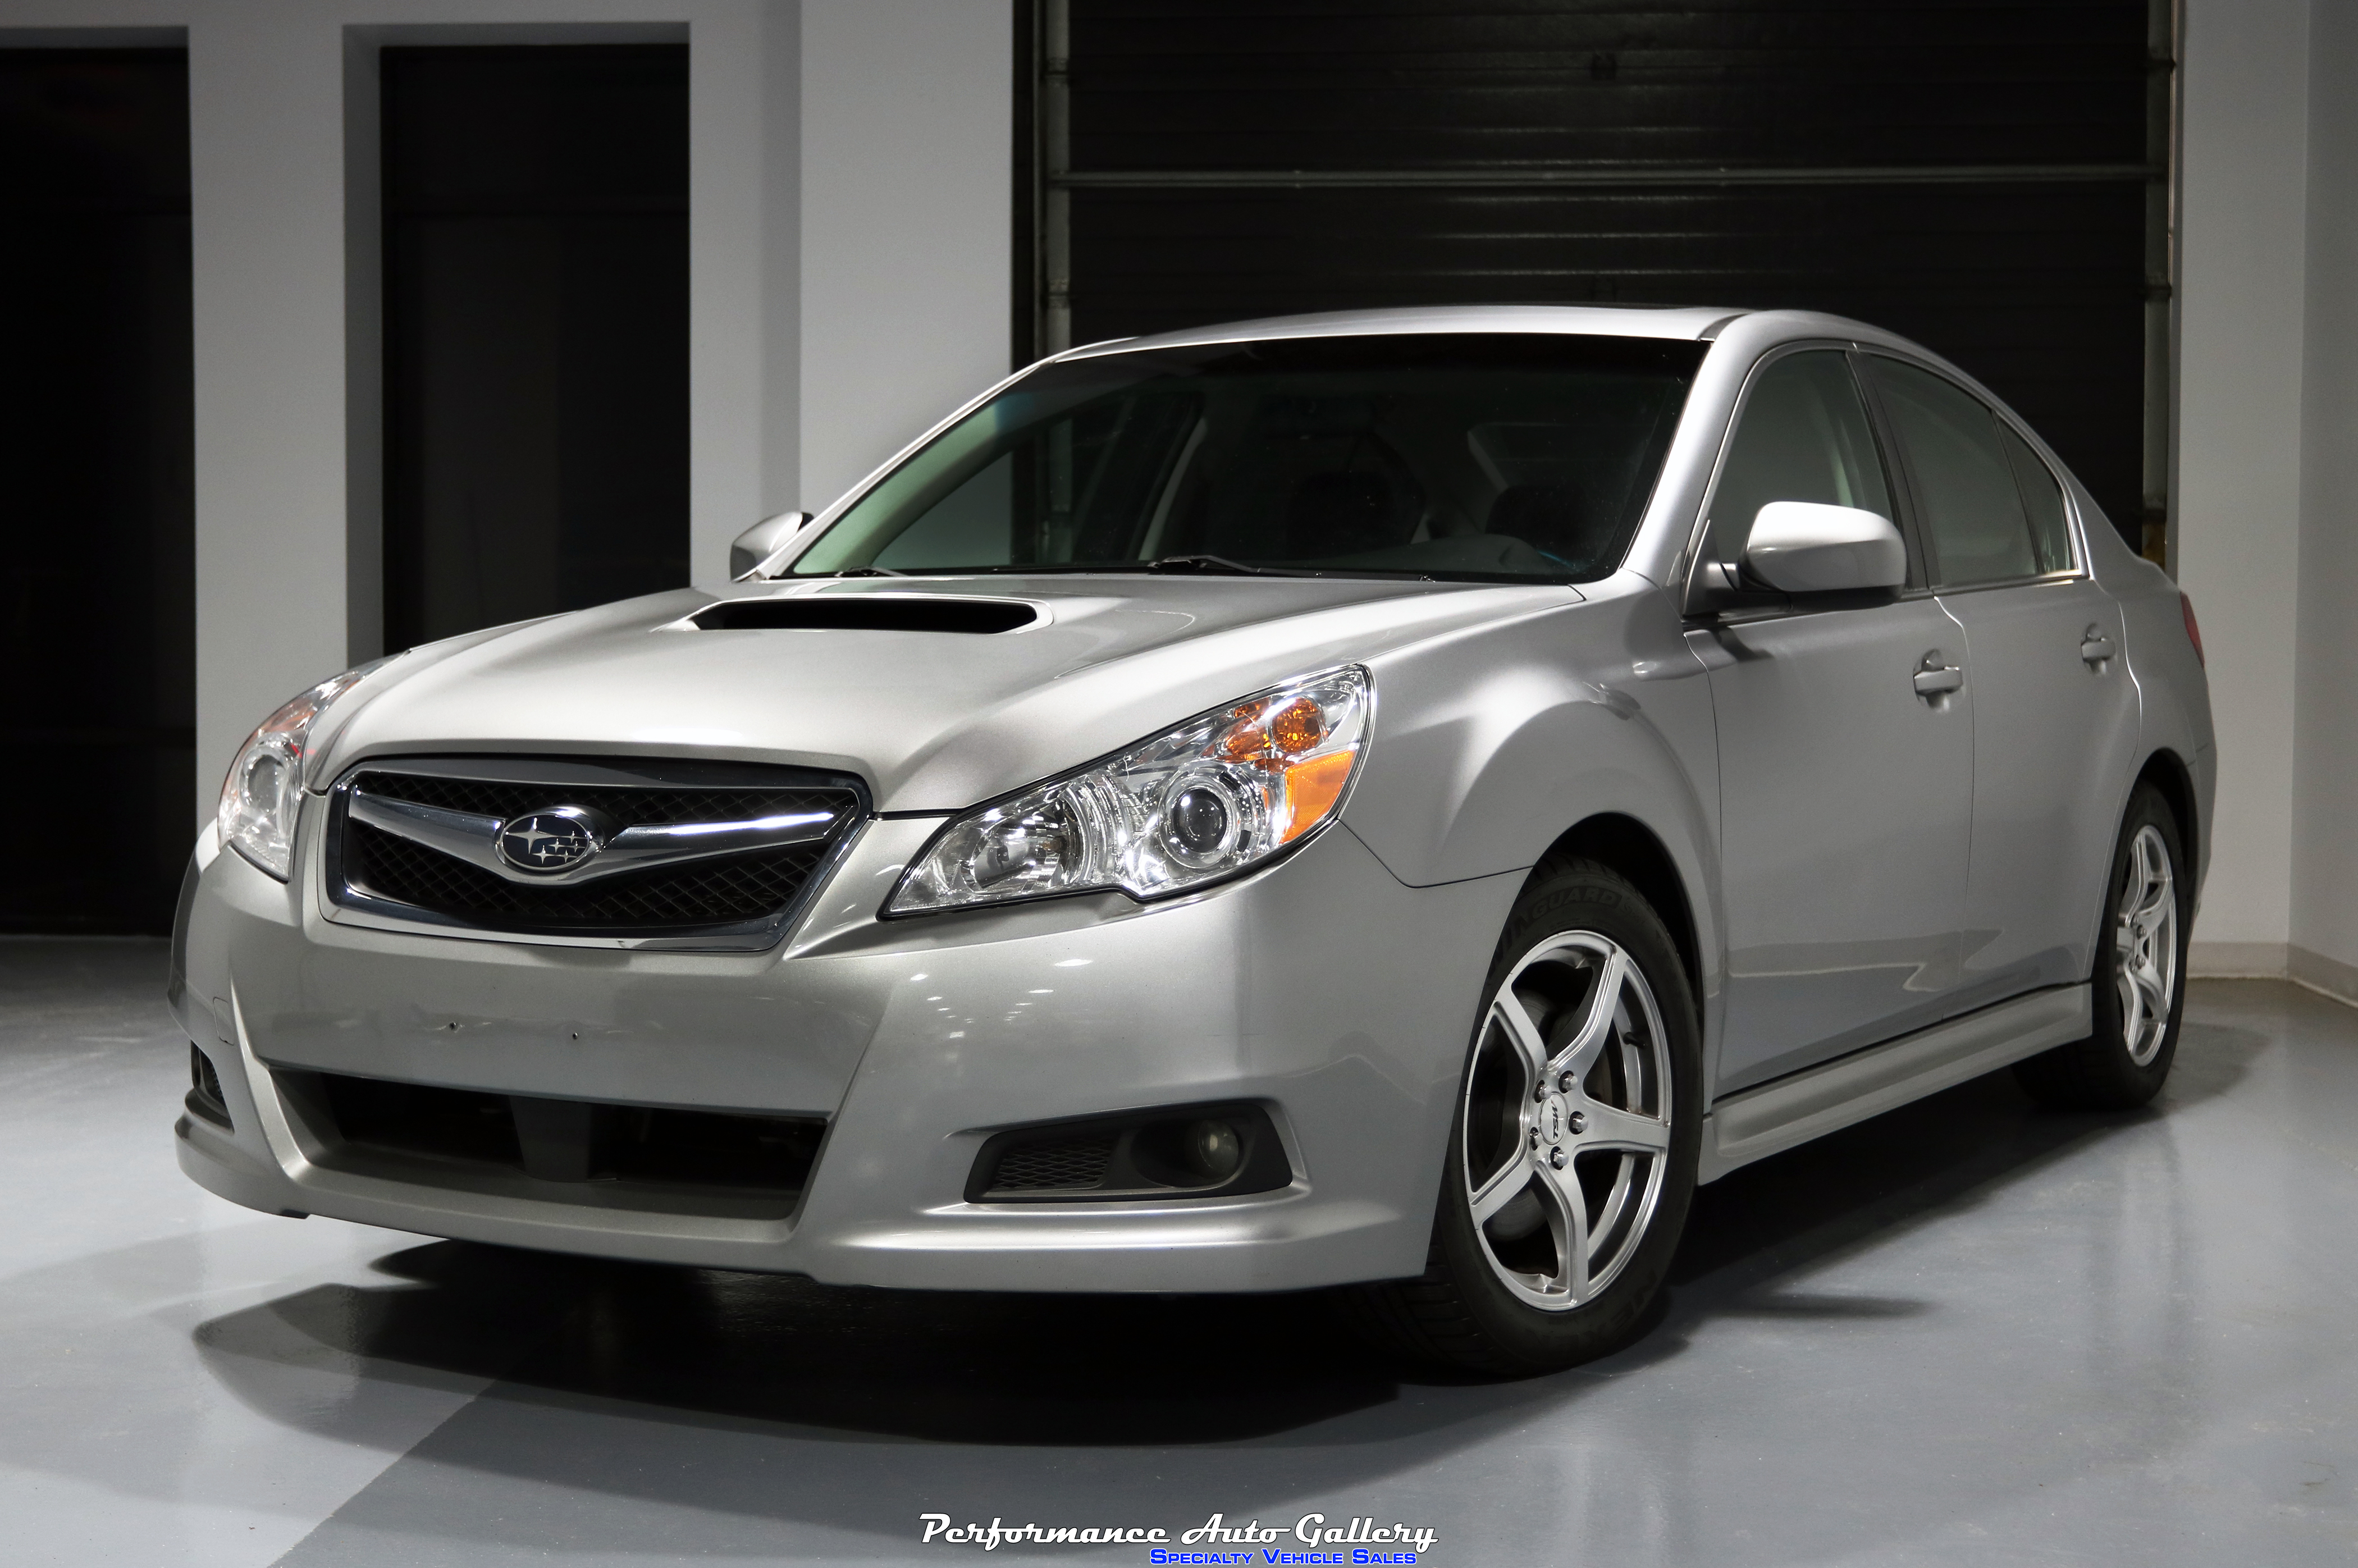 New Arrival- 2011 Subaru Legacy 2.5GT Limited for Sale! Rare! -